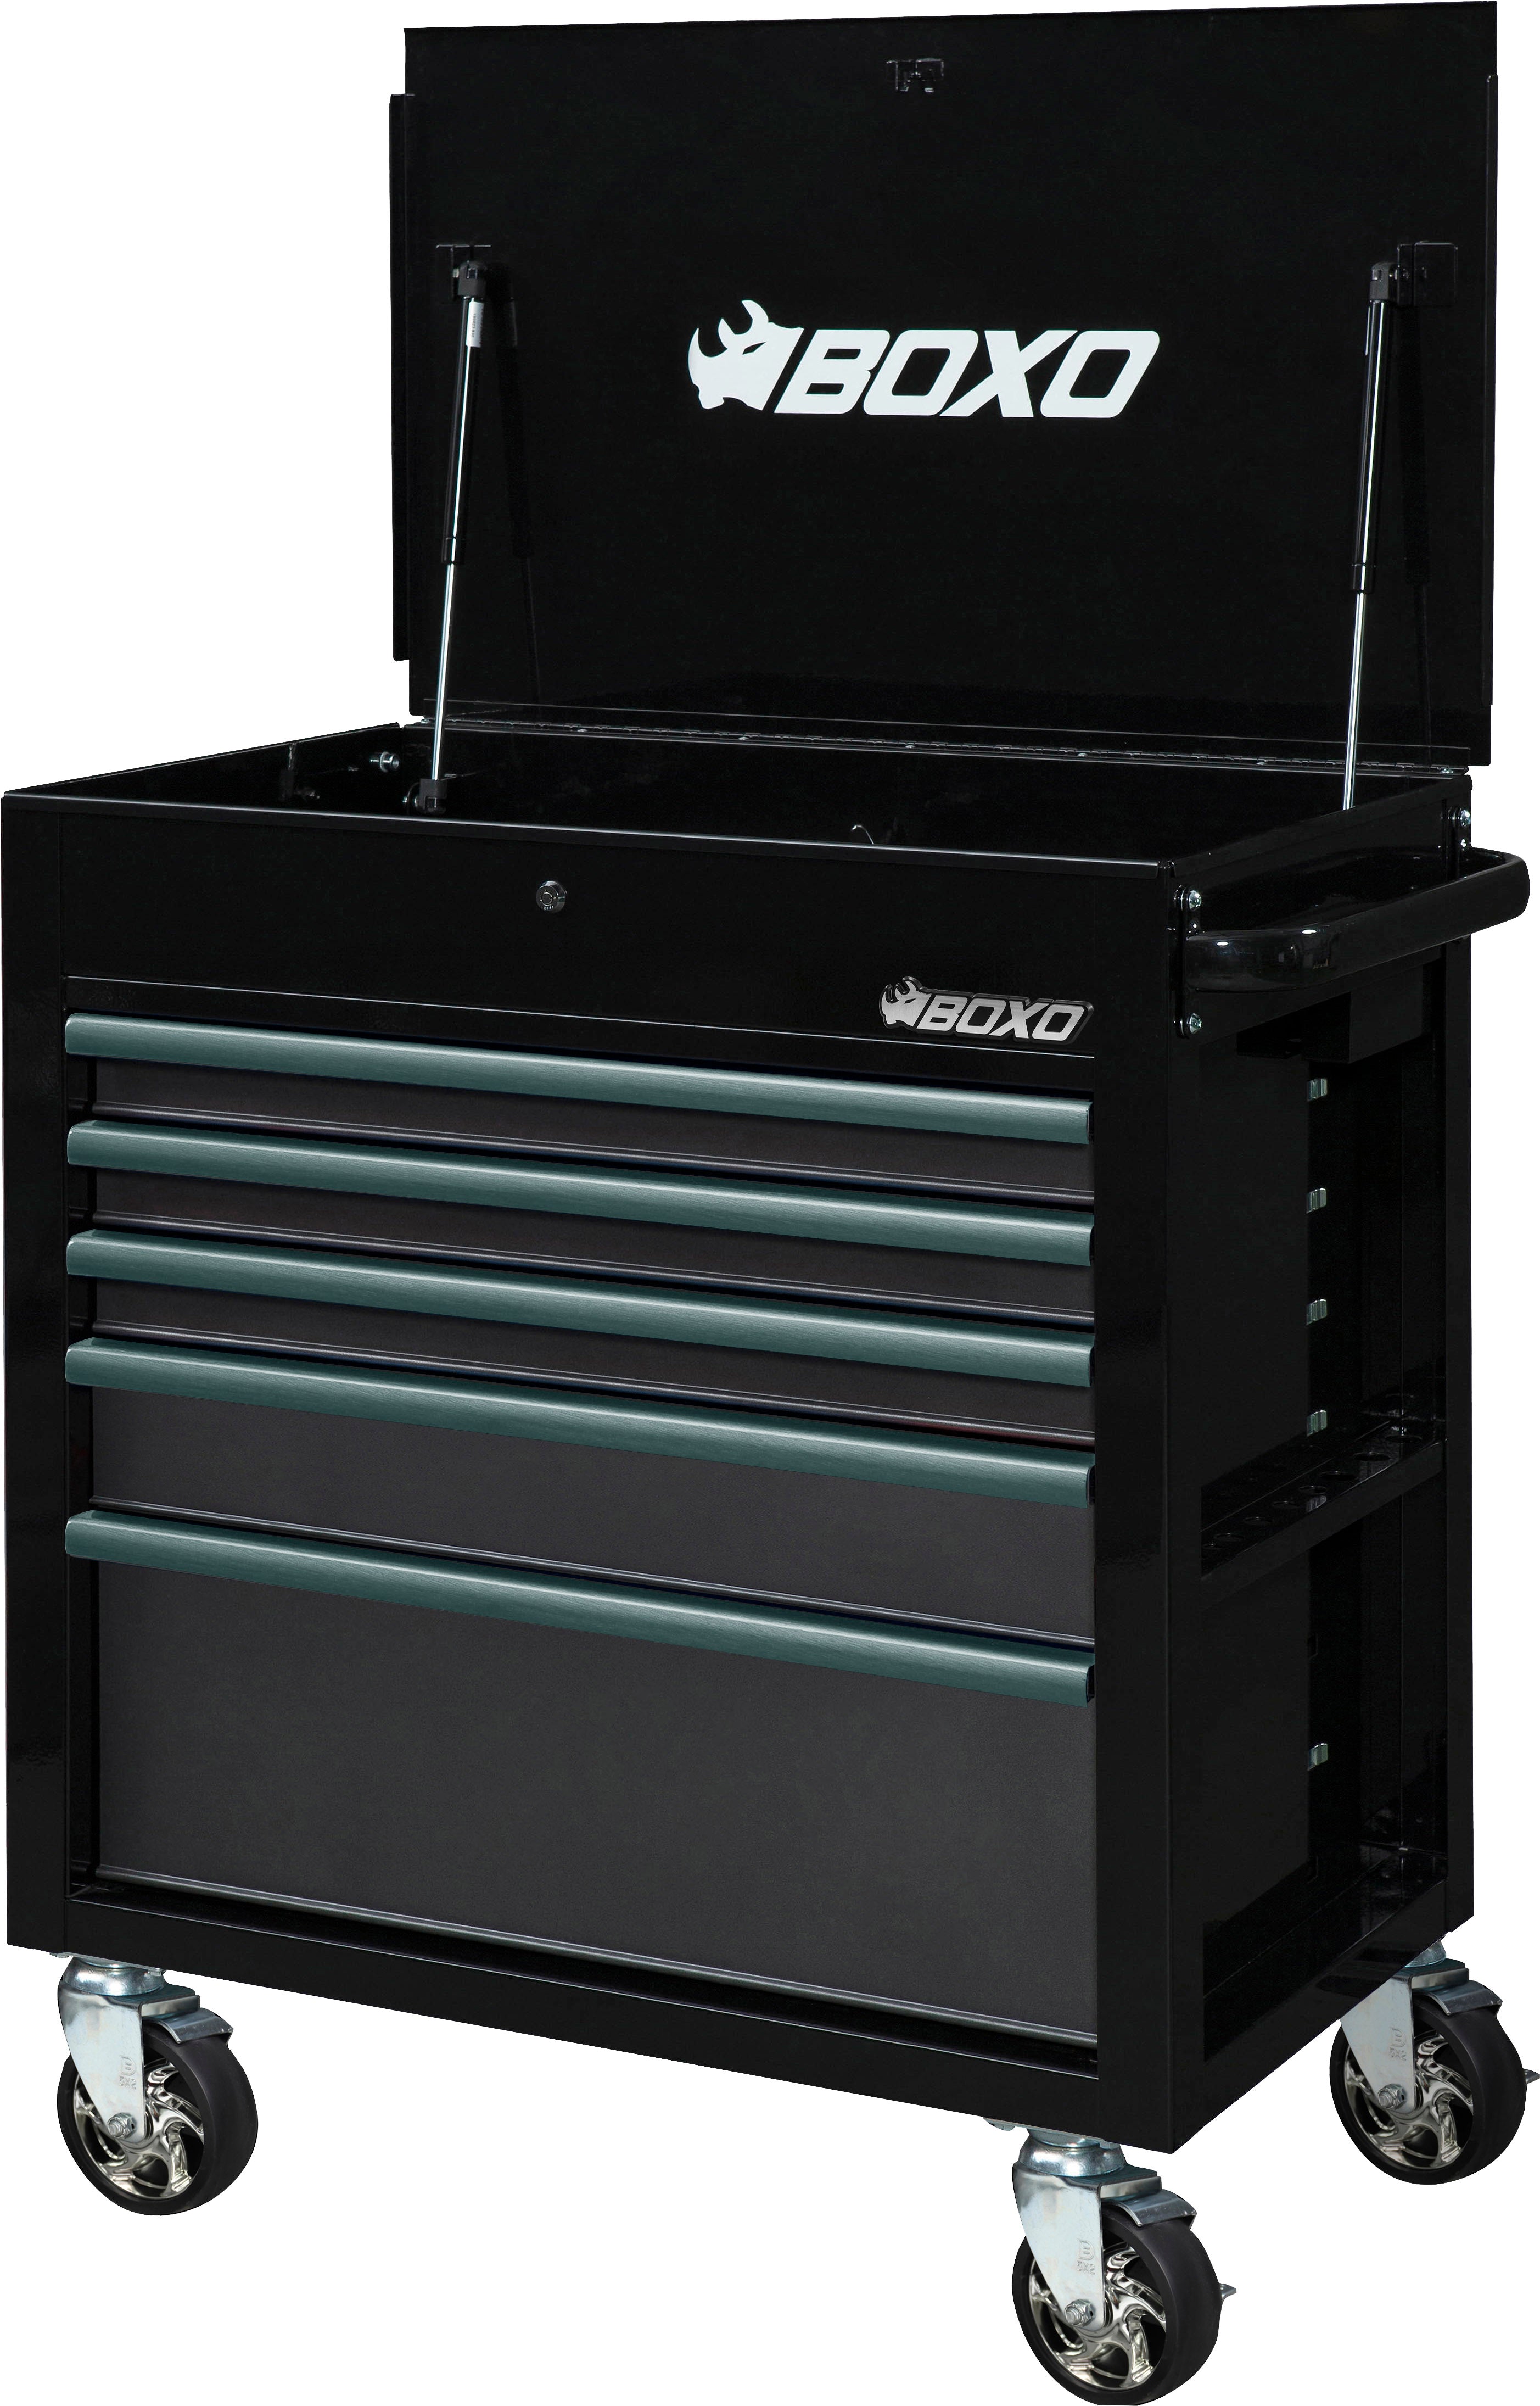 BOXO 34" 5 Drawer Open Top Service Cart with Drawer Trim Pack - Black Body & Trim Colour options